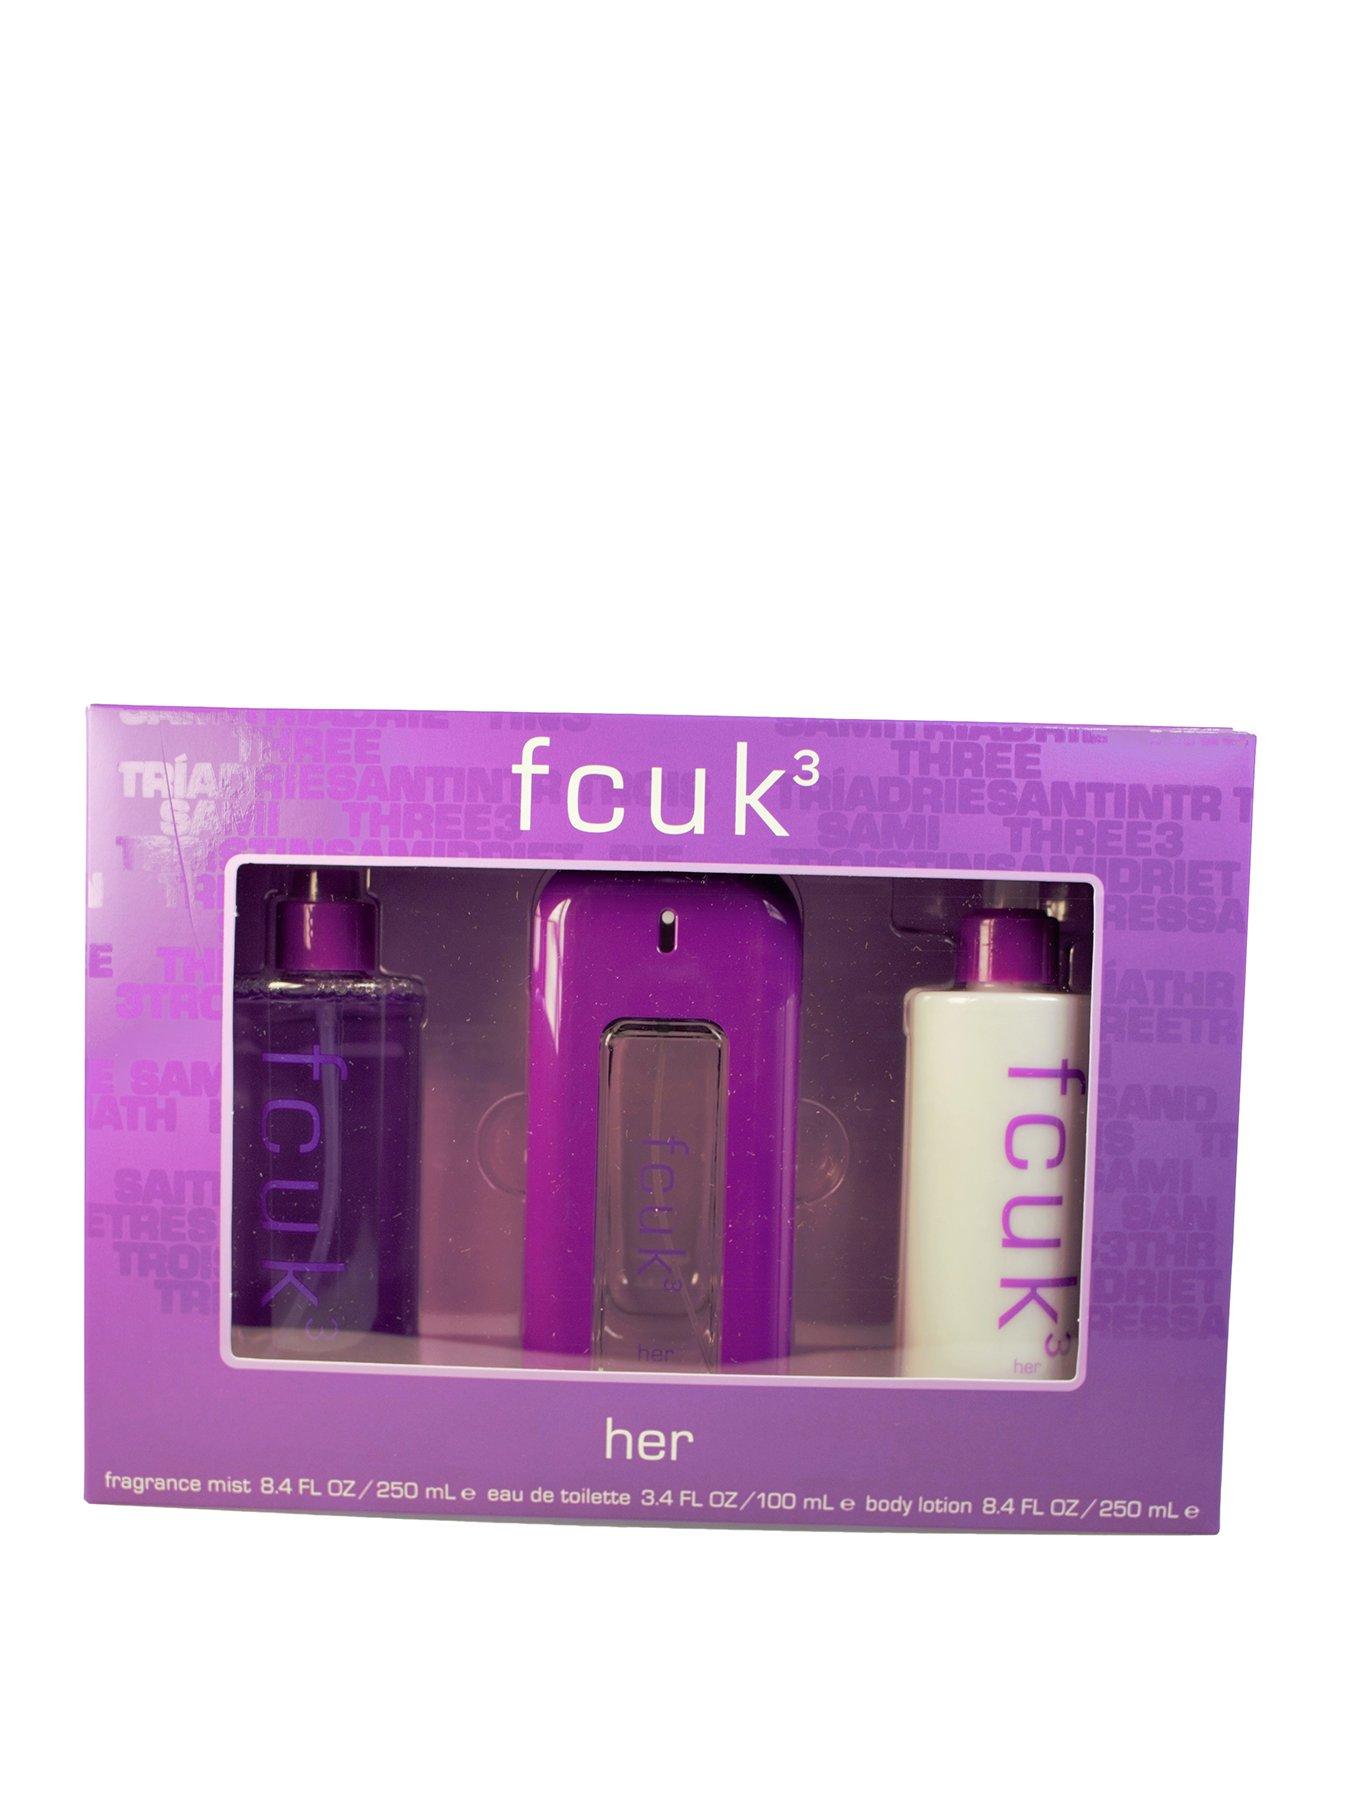 FCUK 3 Her Gift Set Edition - Total Weight 600 ml | littlewoods.com